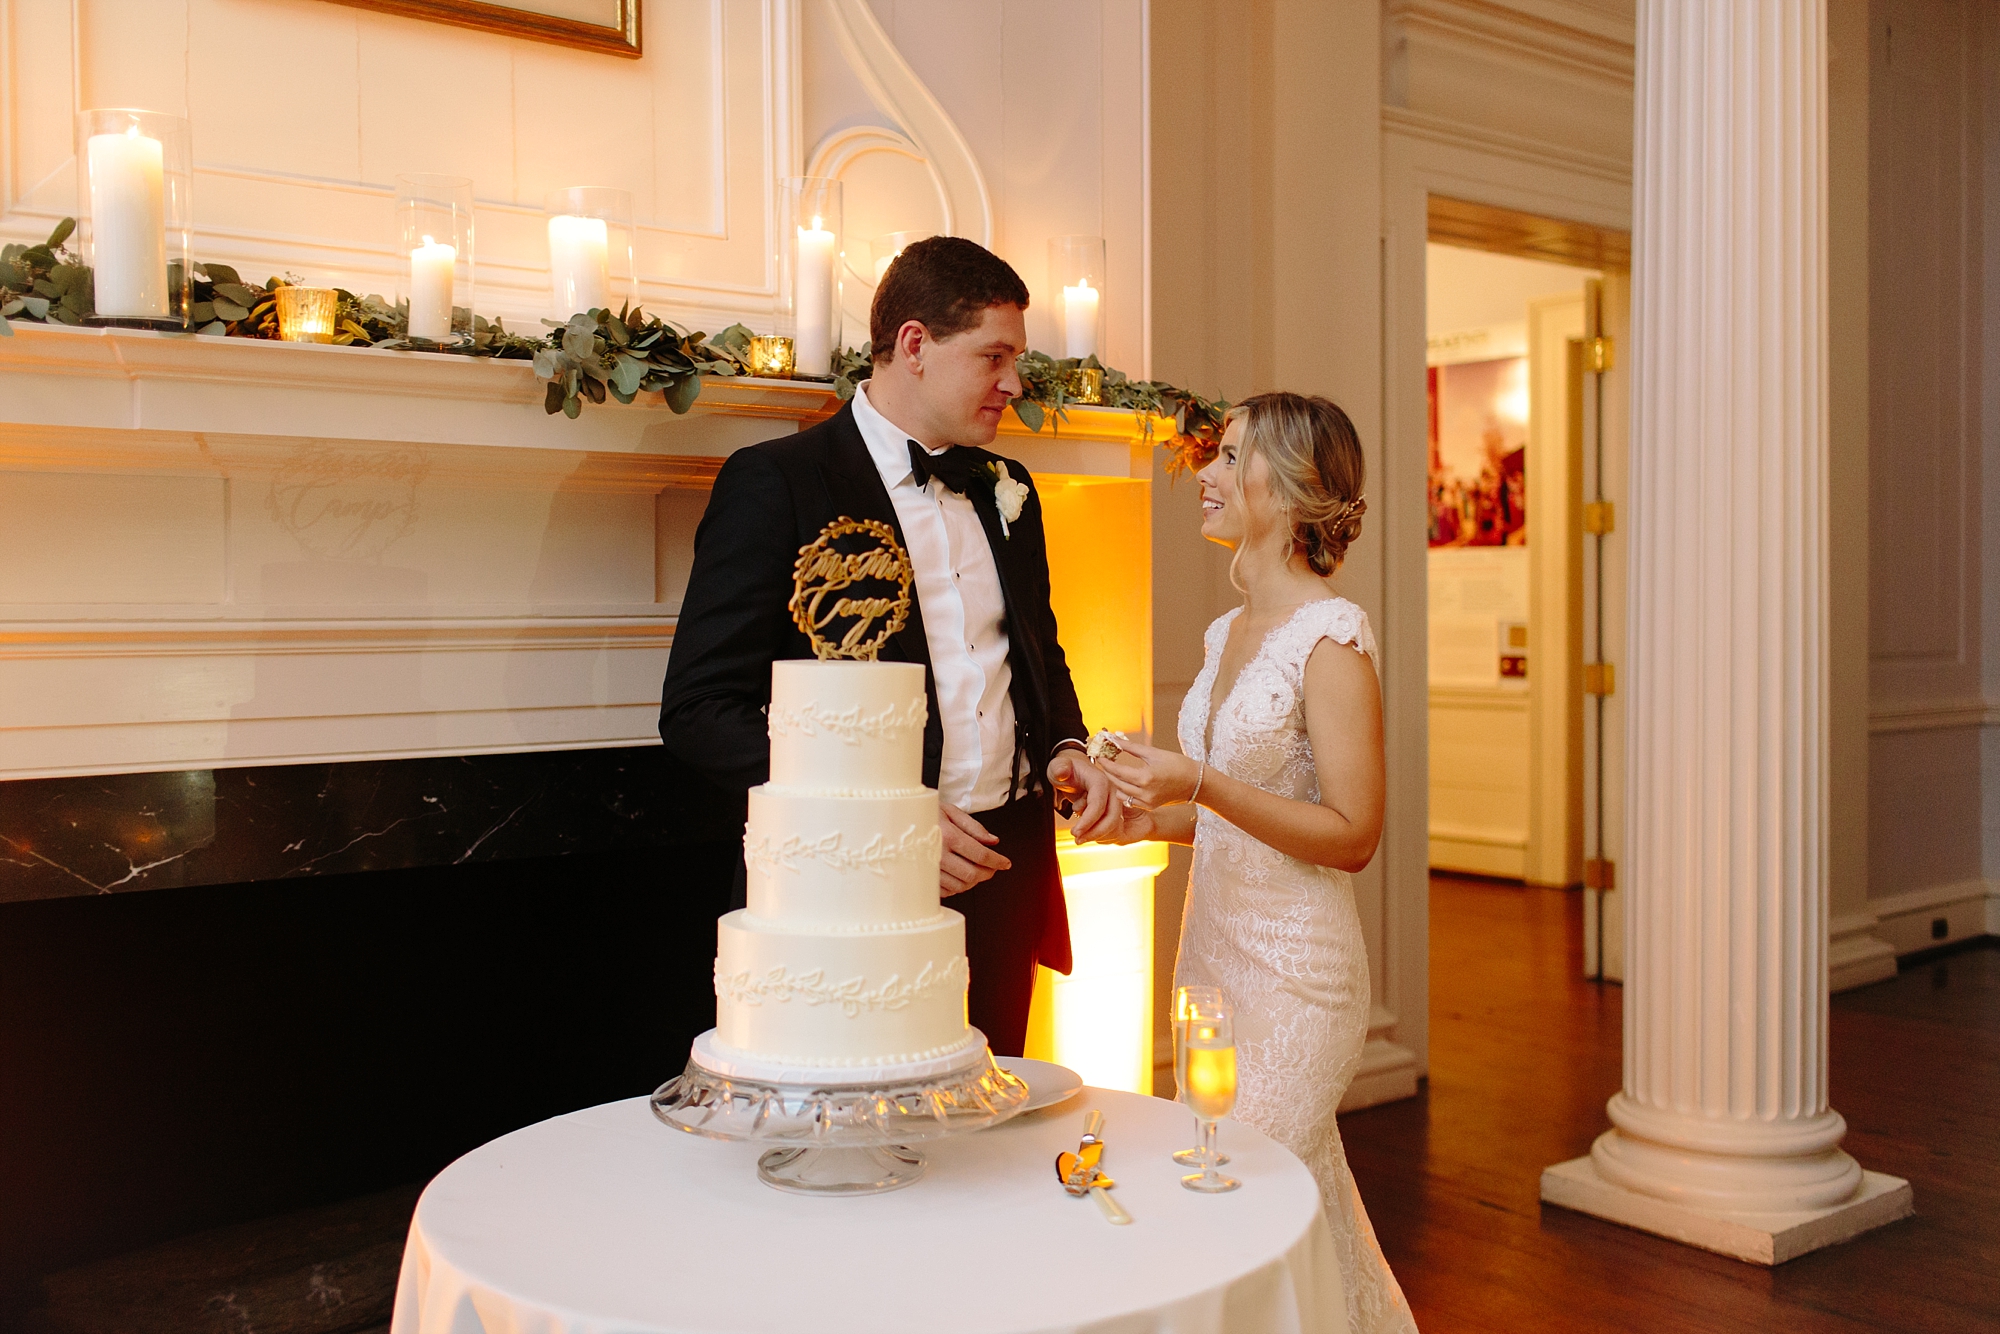 Bride and groom cake cutting at a classy and Elegant reception at the Old Exchange and Provost Dungeon. Historic Downtown Charleston, SC Wedding by top ranked photographers Leigh and Becca.